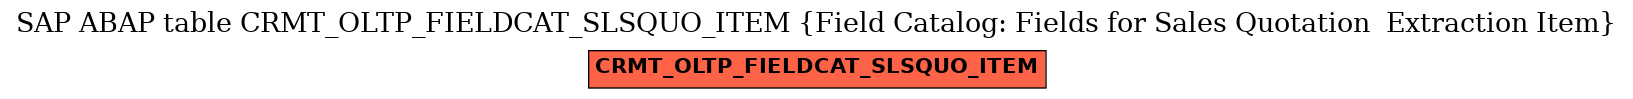 E-R Diagram for table CRMT_OLTP_FIELDCAT_SLSQUO_ITEM (Field Catalog: Fields for Sales Quotation  Extraction Item)